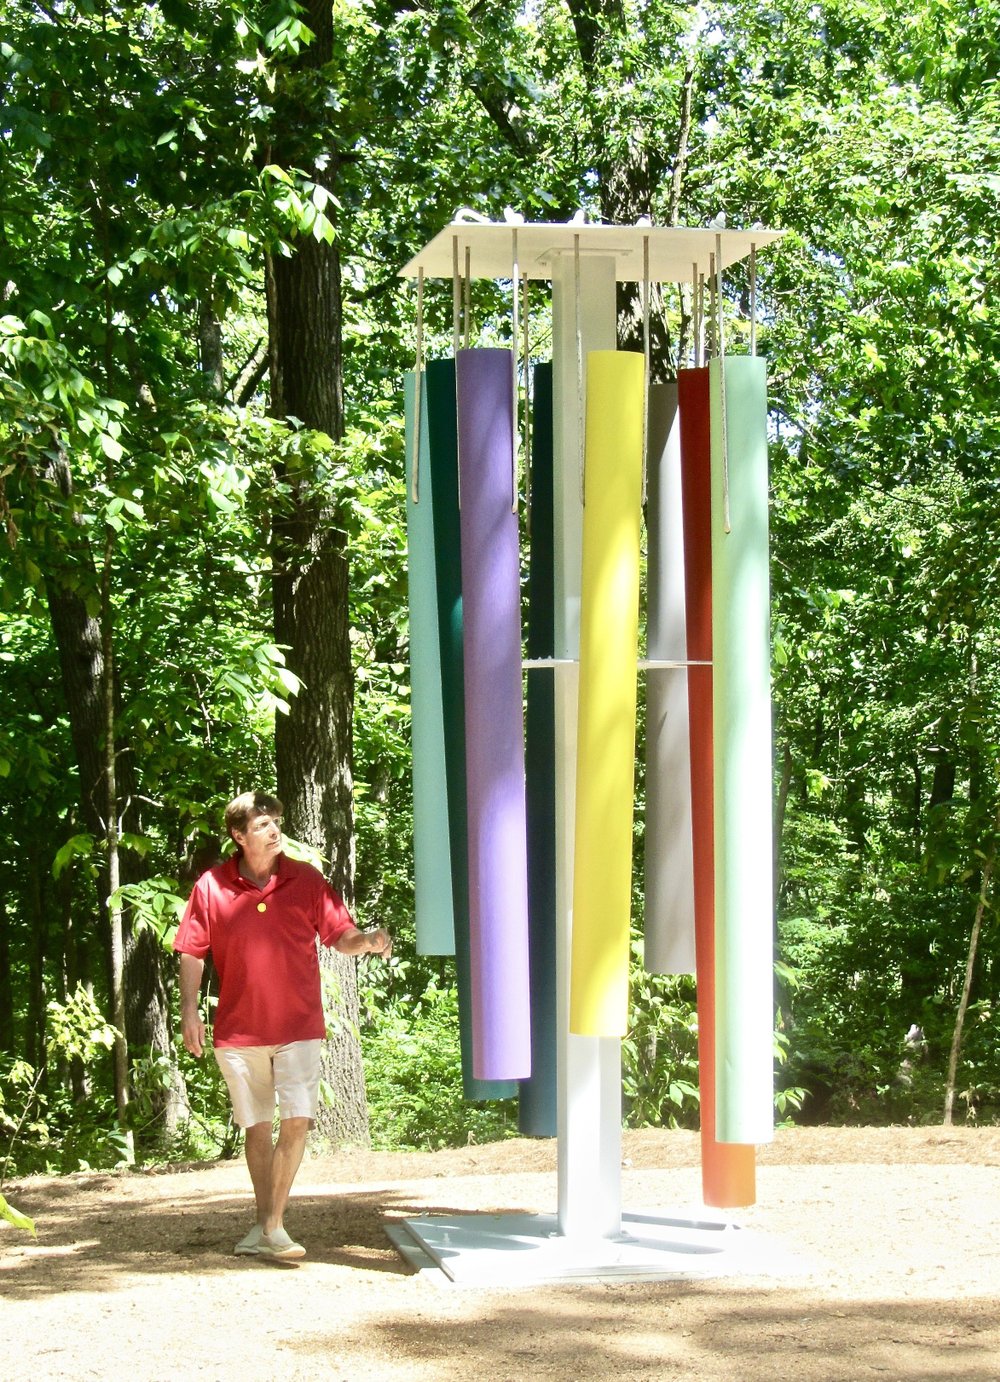 Sam Falls’ Untitled (Wind Chimes) invites visitors to make music in the “Color Field” exhibit at Crystal Bridges Museum of American Art. Photo by Marcia Schnedler, special to the Democrat-Gazette